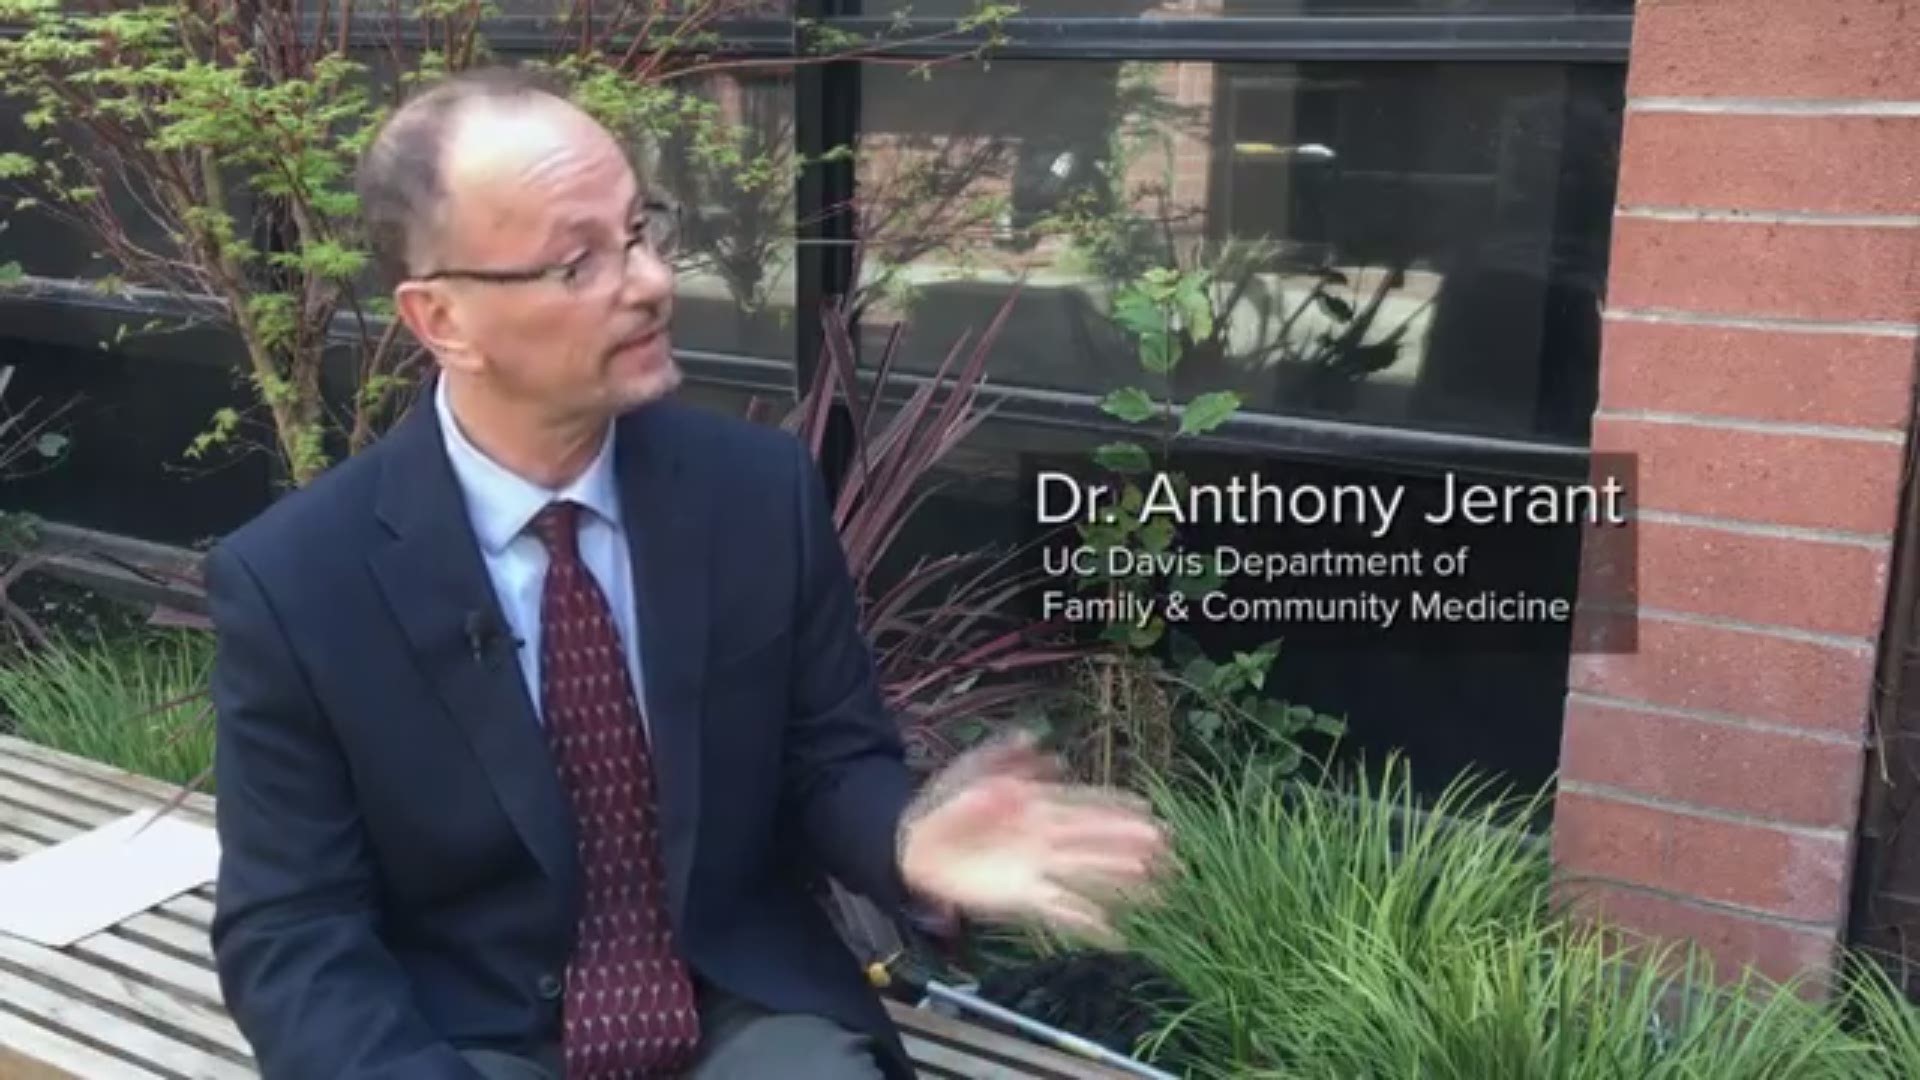 Suicide is a leading cause of death for Americans. It's the fourth leading cause for middle-aged men. But Dr. Anthony Jerant, professor & chair of the UC Davis Department of Family & Community Medicine, is working to change that.